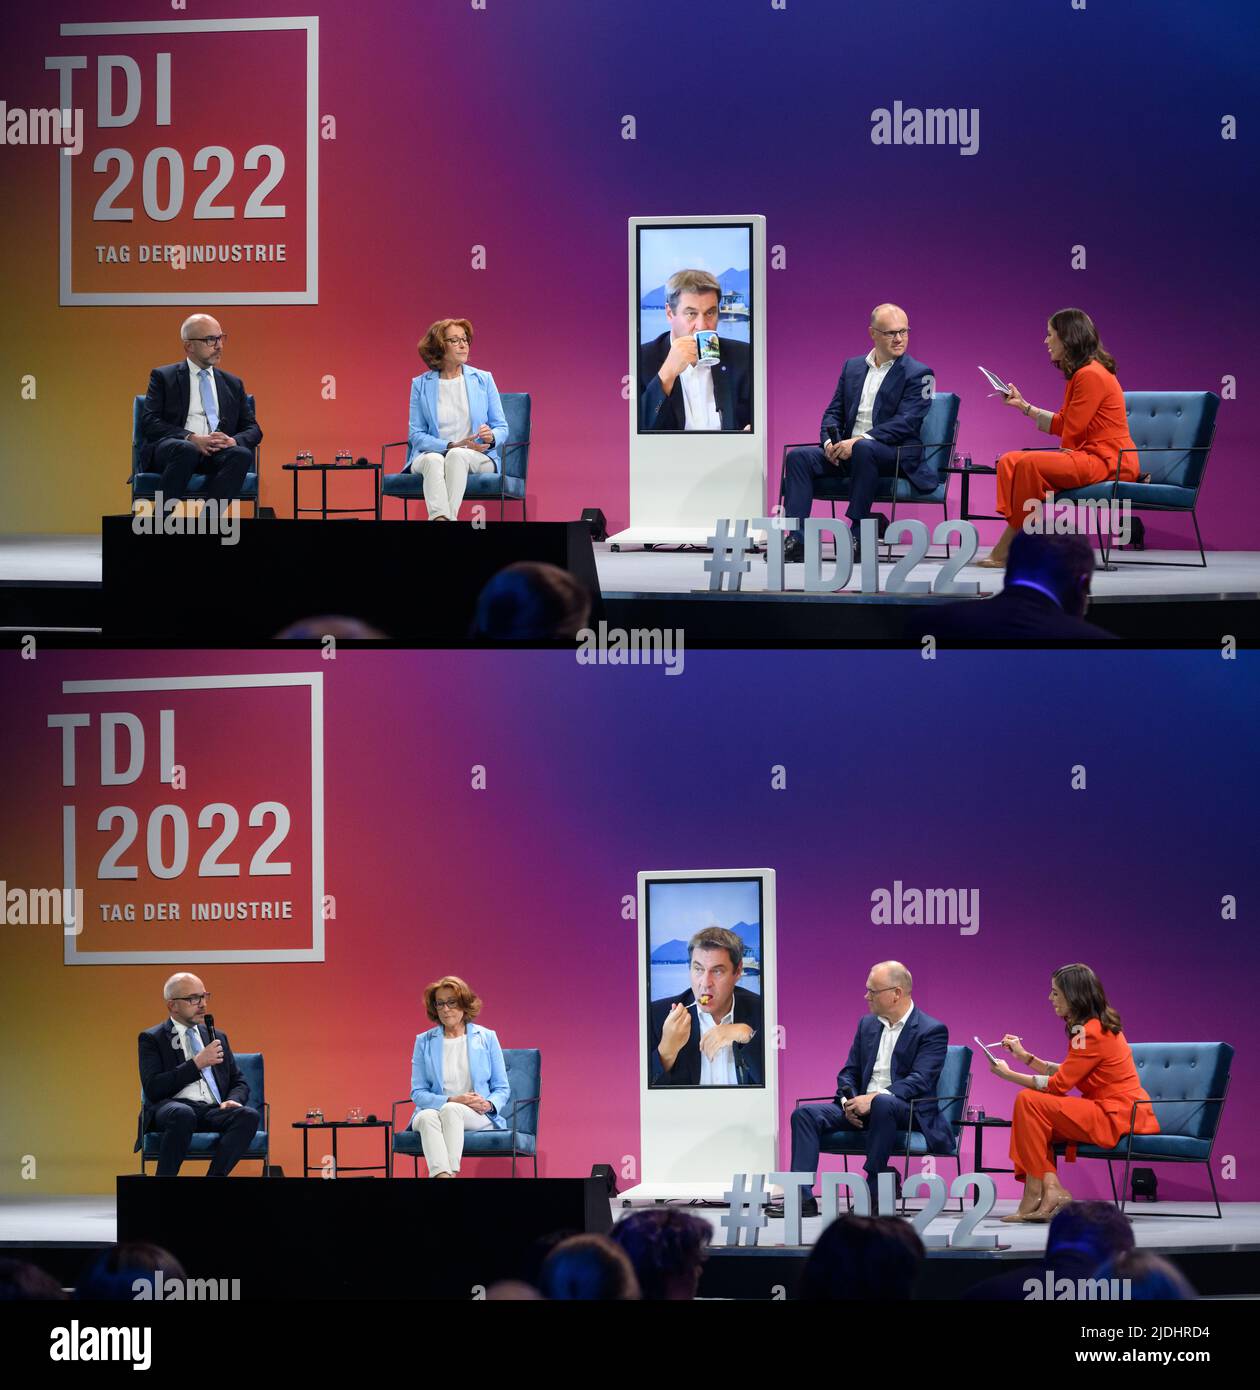 Berlin, Germany. 21st June, 2022. KOMBO - Markus Söder (M, CSU), Prime Minister of Bavaria, drinks and eats while participating - via video feed - in a panel discussion with Daniel Schmidt (l-r), CFO DIN, Sabine Herold, CEO DELO Industrie Klebstoffe, Robert Mayr, CEO DATEV, and moderator Eva-Maria Lemke at the 'TDI - Tag der Industrie' of the Federation of German Industries (BDI). Credit: Bernd von Jutrczenka/dpa/Alamy Live News Stock Photo